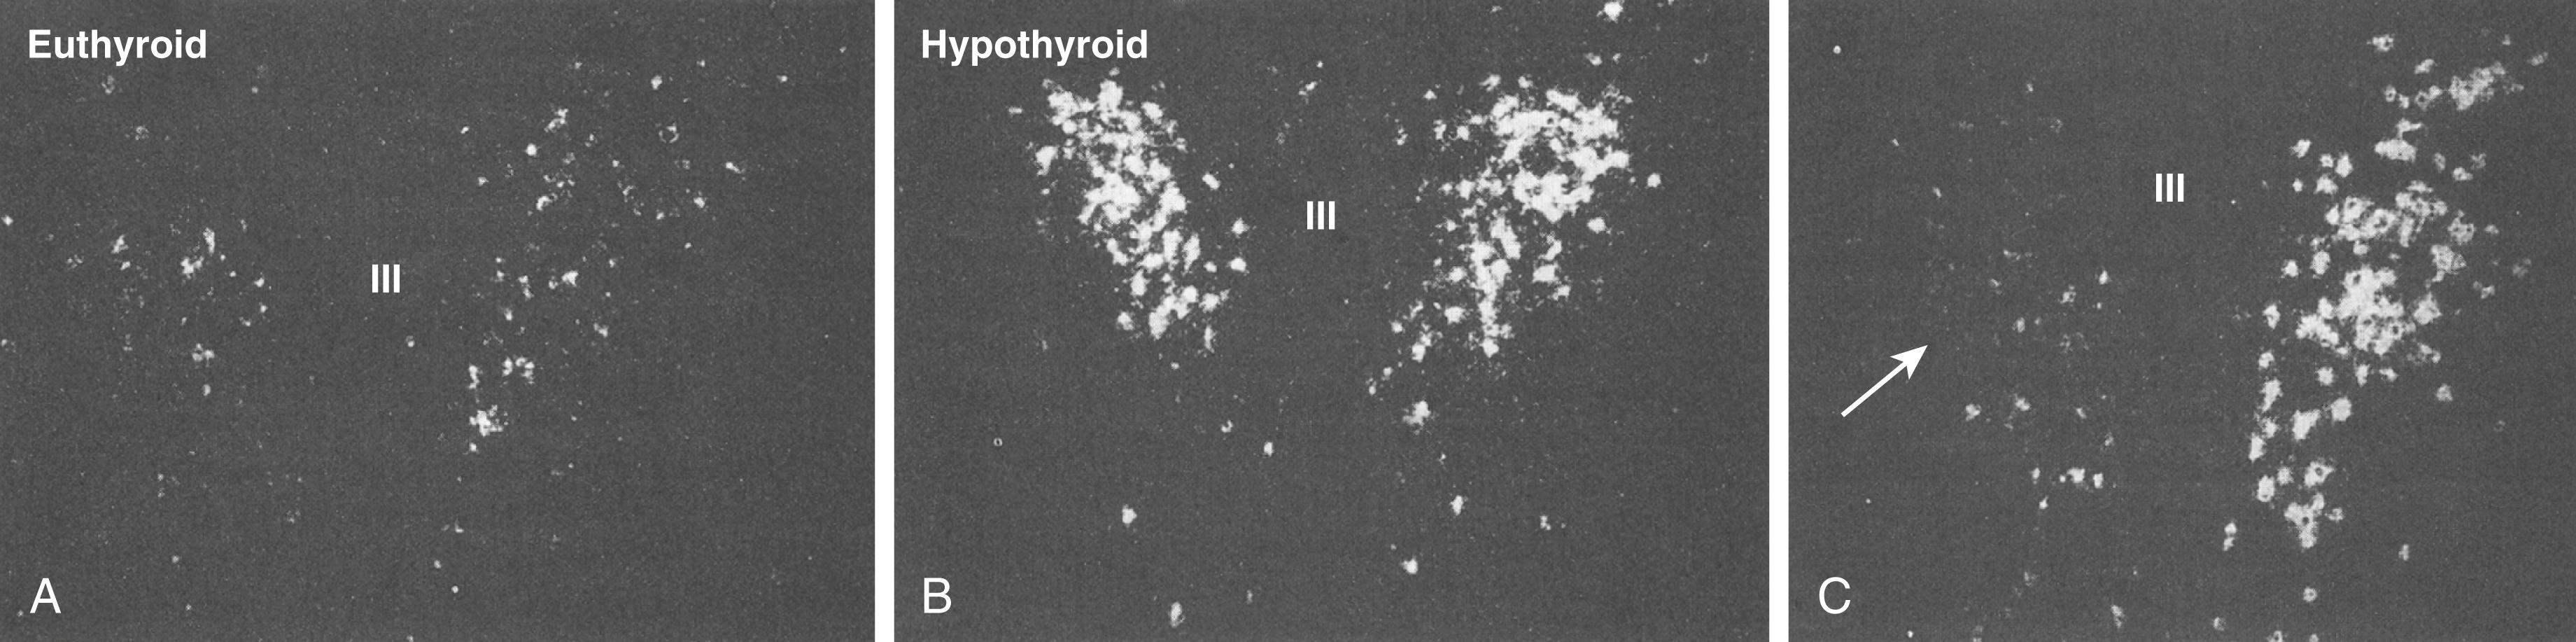 FIGURE 204-2, In situ hybridization autoradiographs of proTRH mRNA in the paraventricular nucleus of ( A ) euthyroid and ( B ) hypothyroid rats.